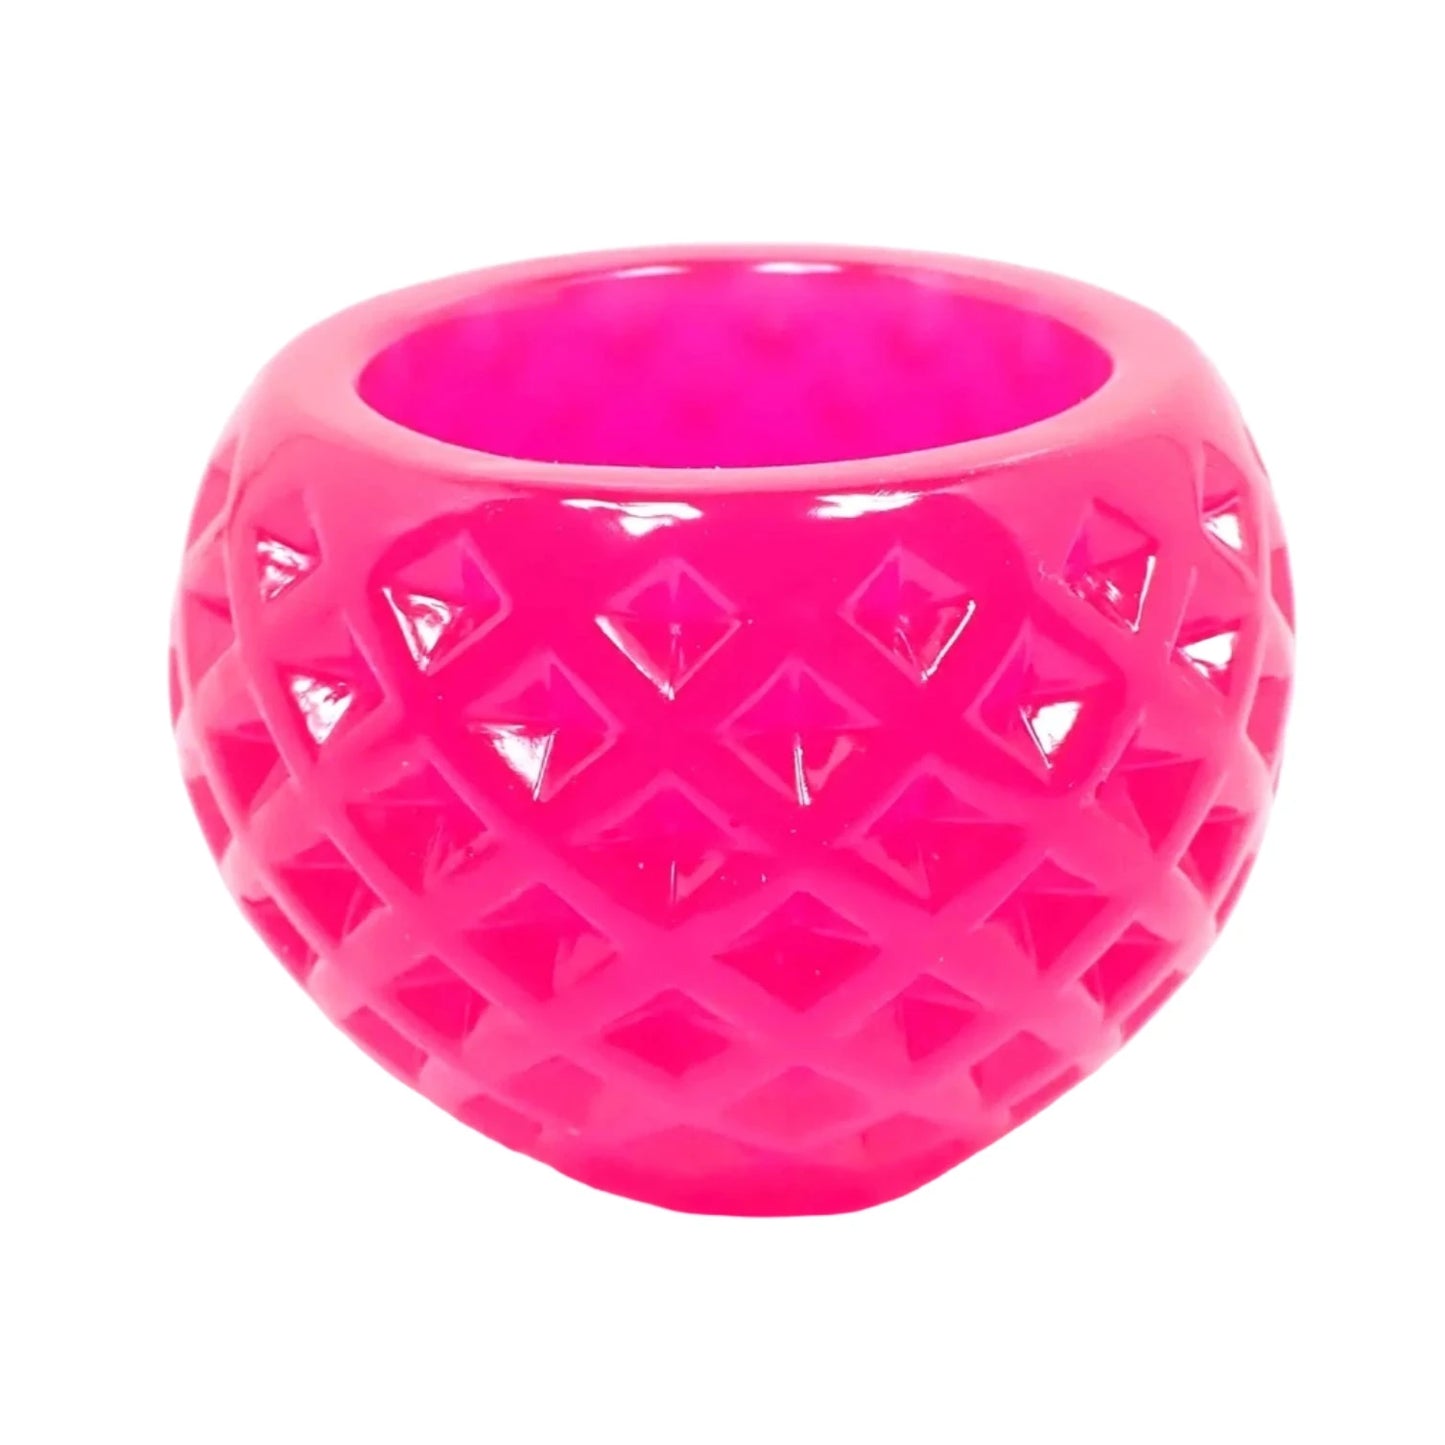 Side view of the small round handmade resin succulent pot. The resin is bright neon pink in color. There is a diamond shaped indented pattern all the way around it. The top has a round opening for tiny plants or small trinkets.